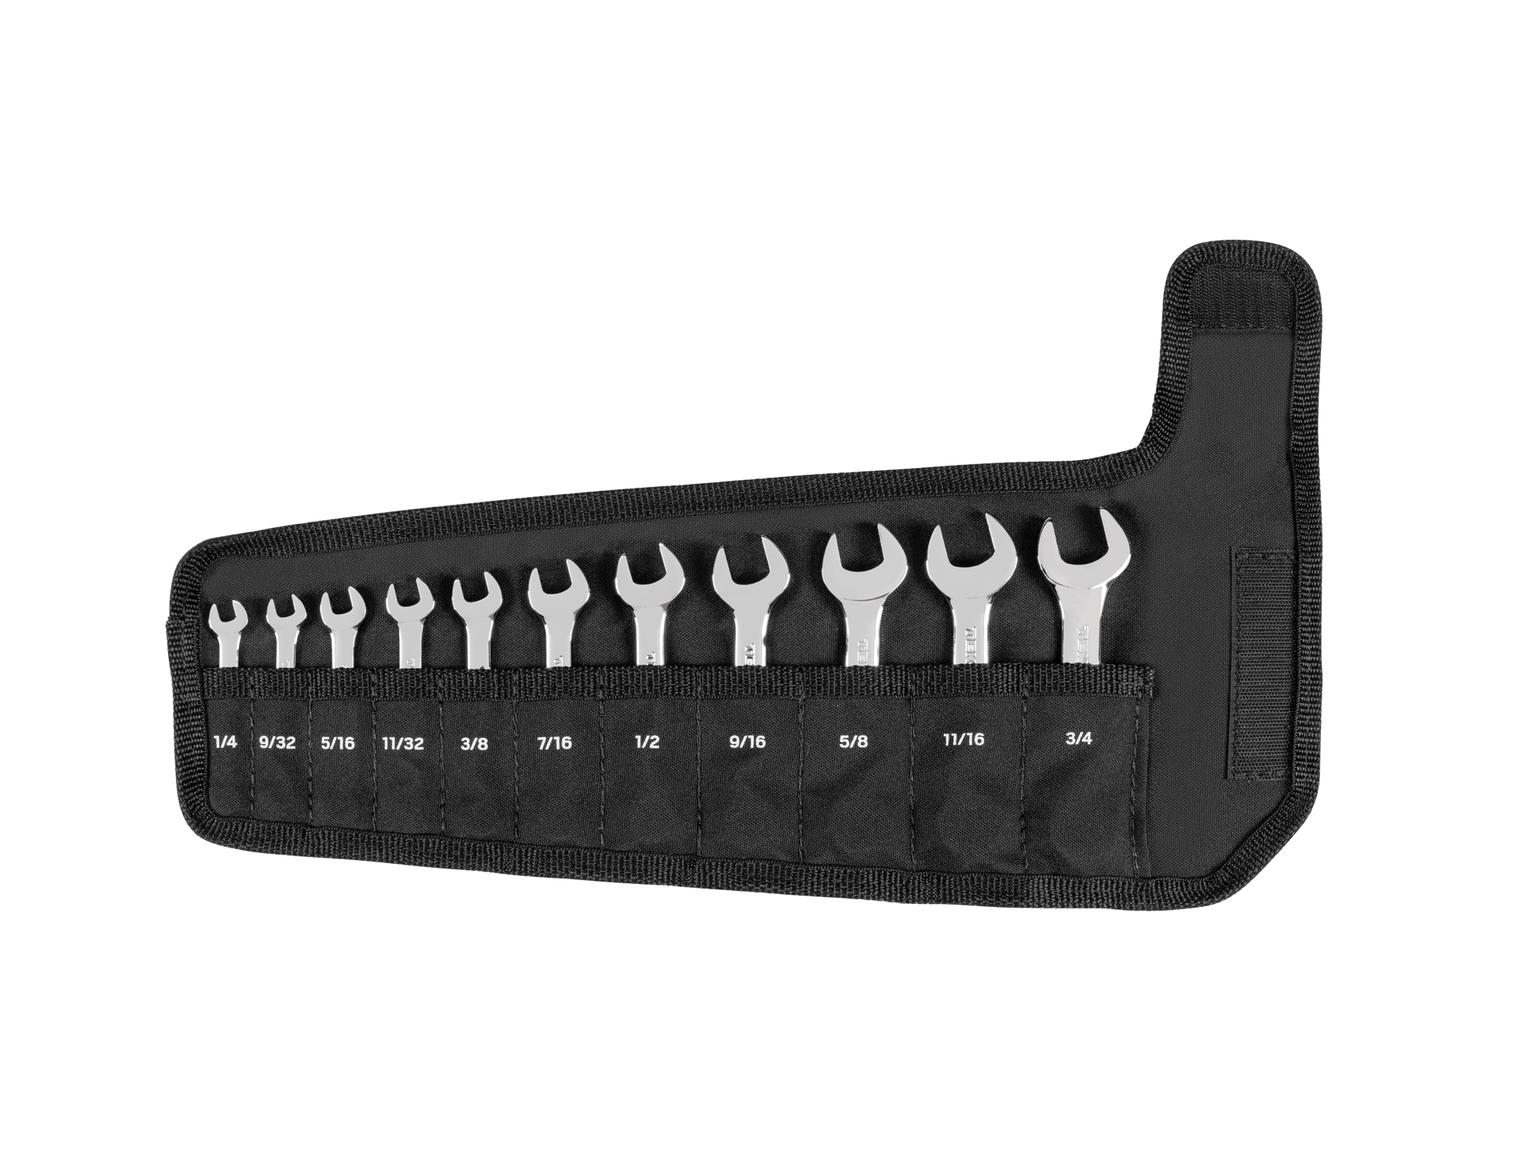 Stubby Combination Wrench Set with Pouch, 11-Piece (1/4 - 3/4 in.)